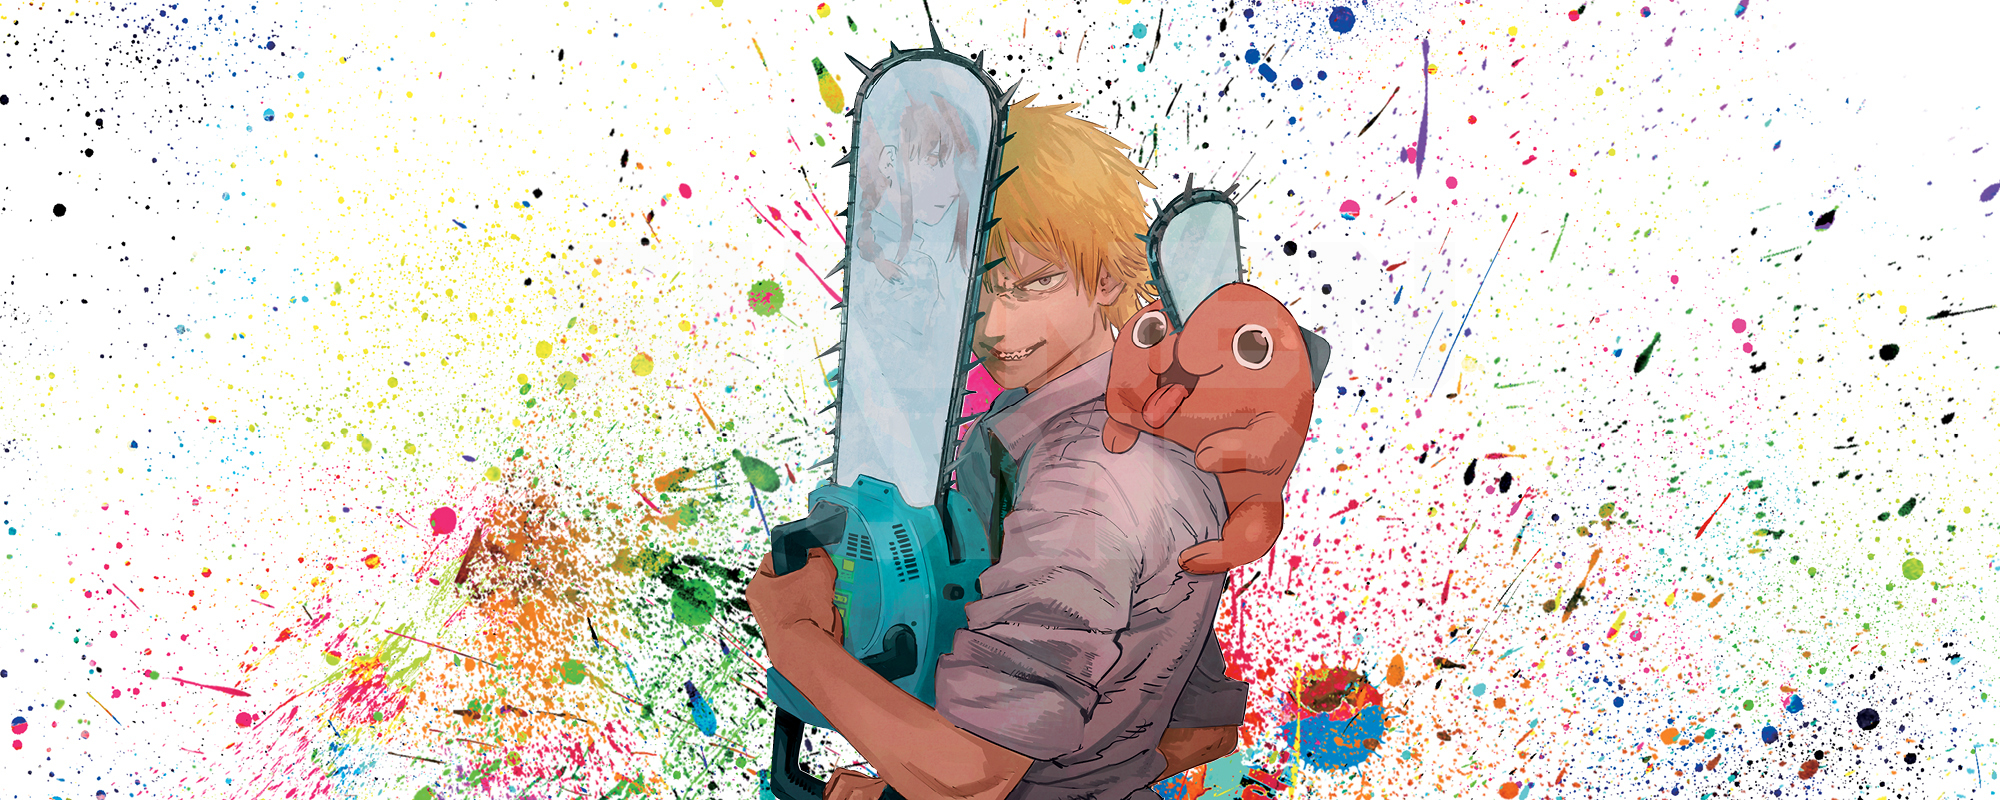 An illustration of Denji from the manga Chainsaw Man. He’s clutching a chainsaw and his red dog with a chainsaw protruding from its head, Pochita, sits on his shoulder. We can see a pink haired woman named Makima in the reflection of the metal in his chainsaw.